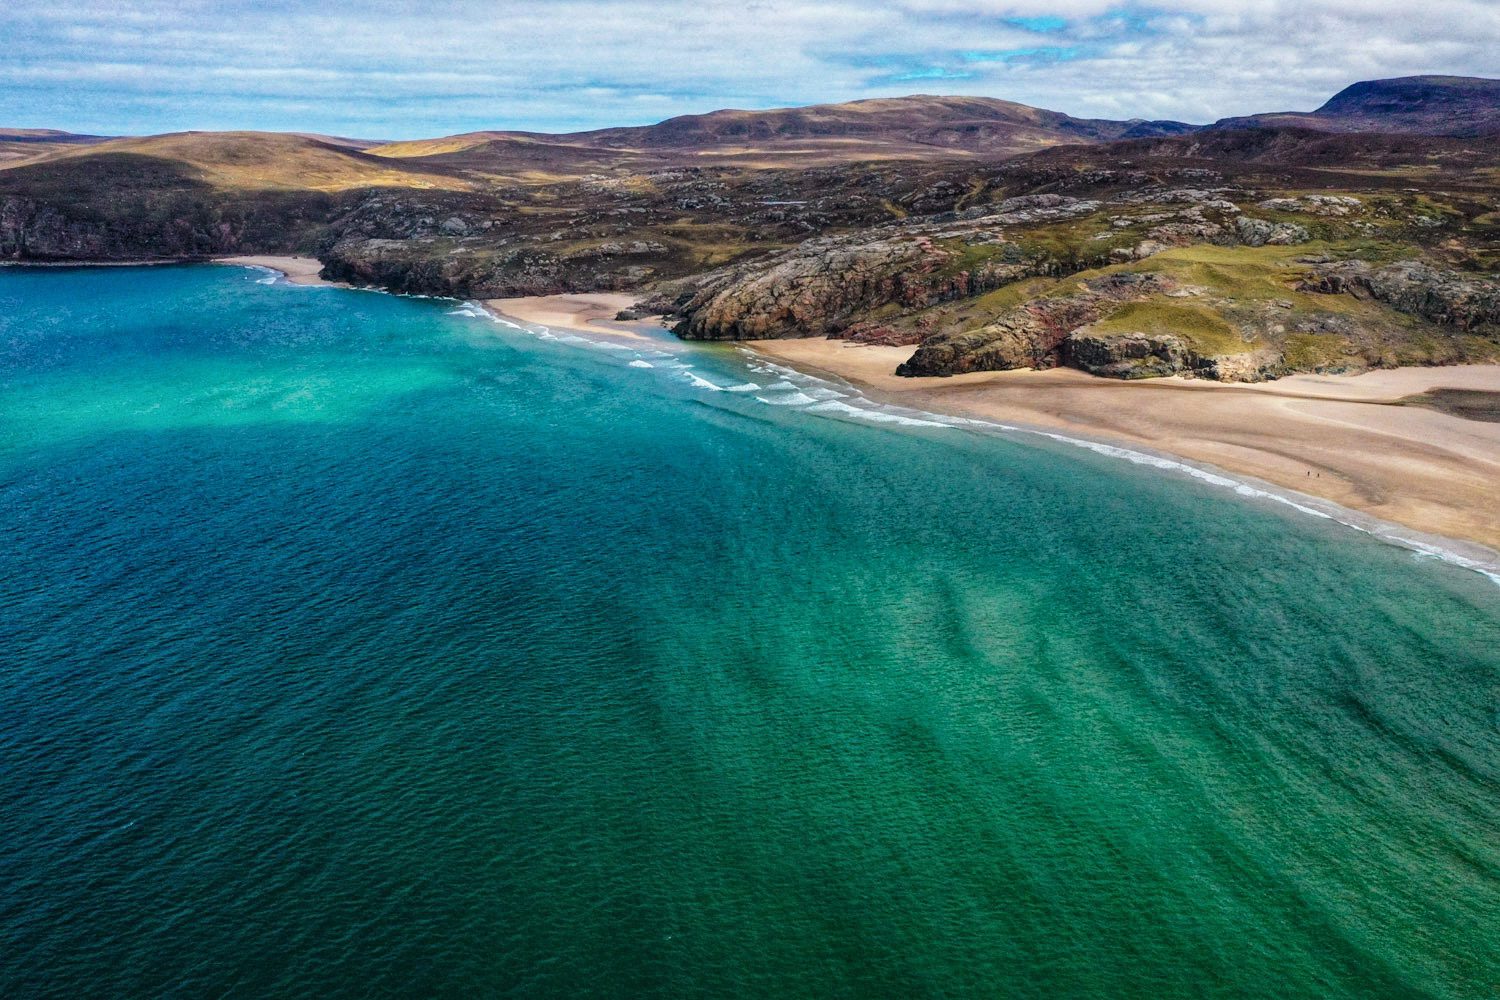 Drone photograph of the coastline of North West Scottish Highlands. The photograph shows and emerald coloured Atlantic Ocean next to a series of bays leading to a wild undeveloped landscape.